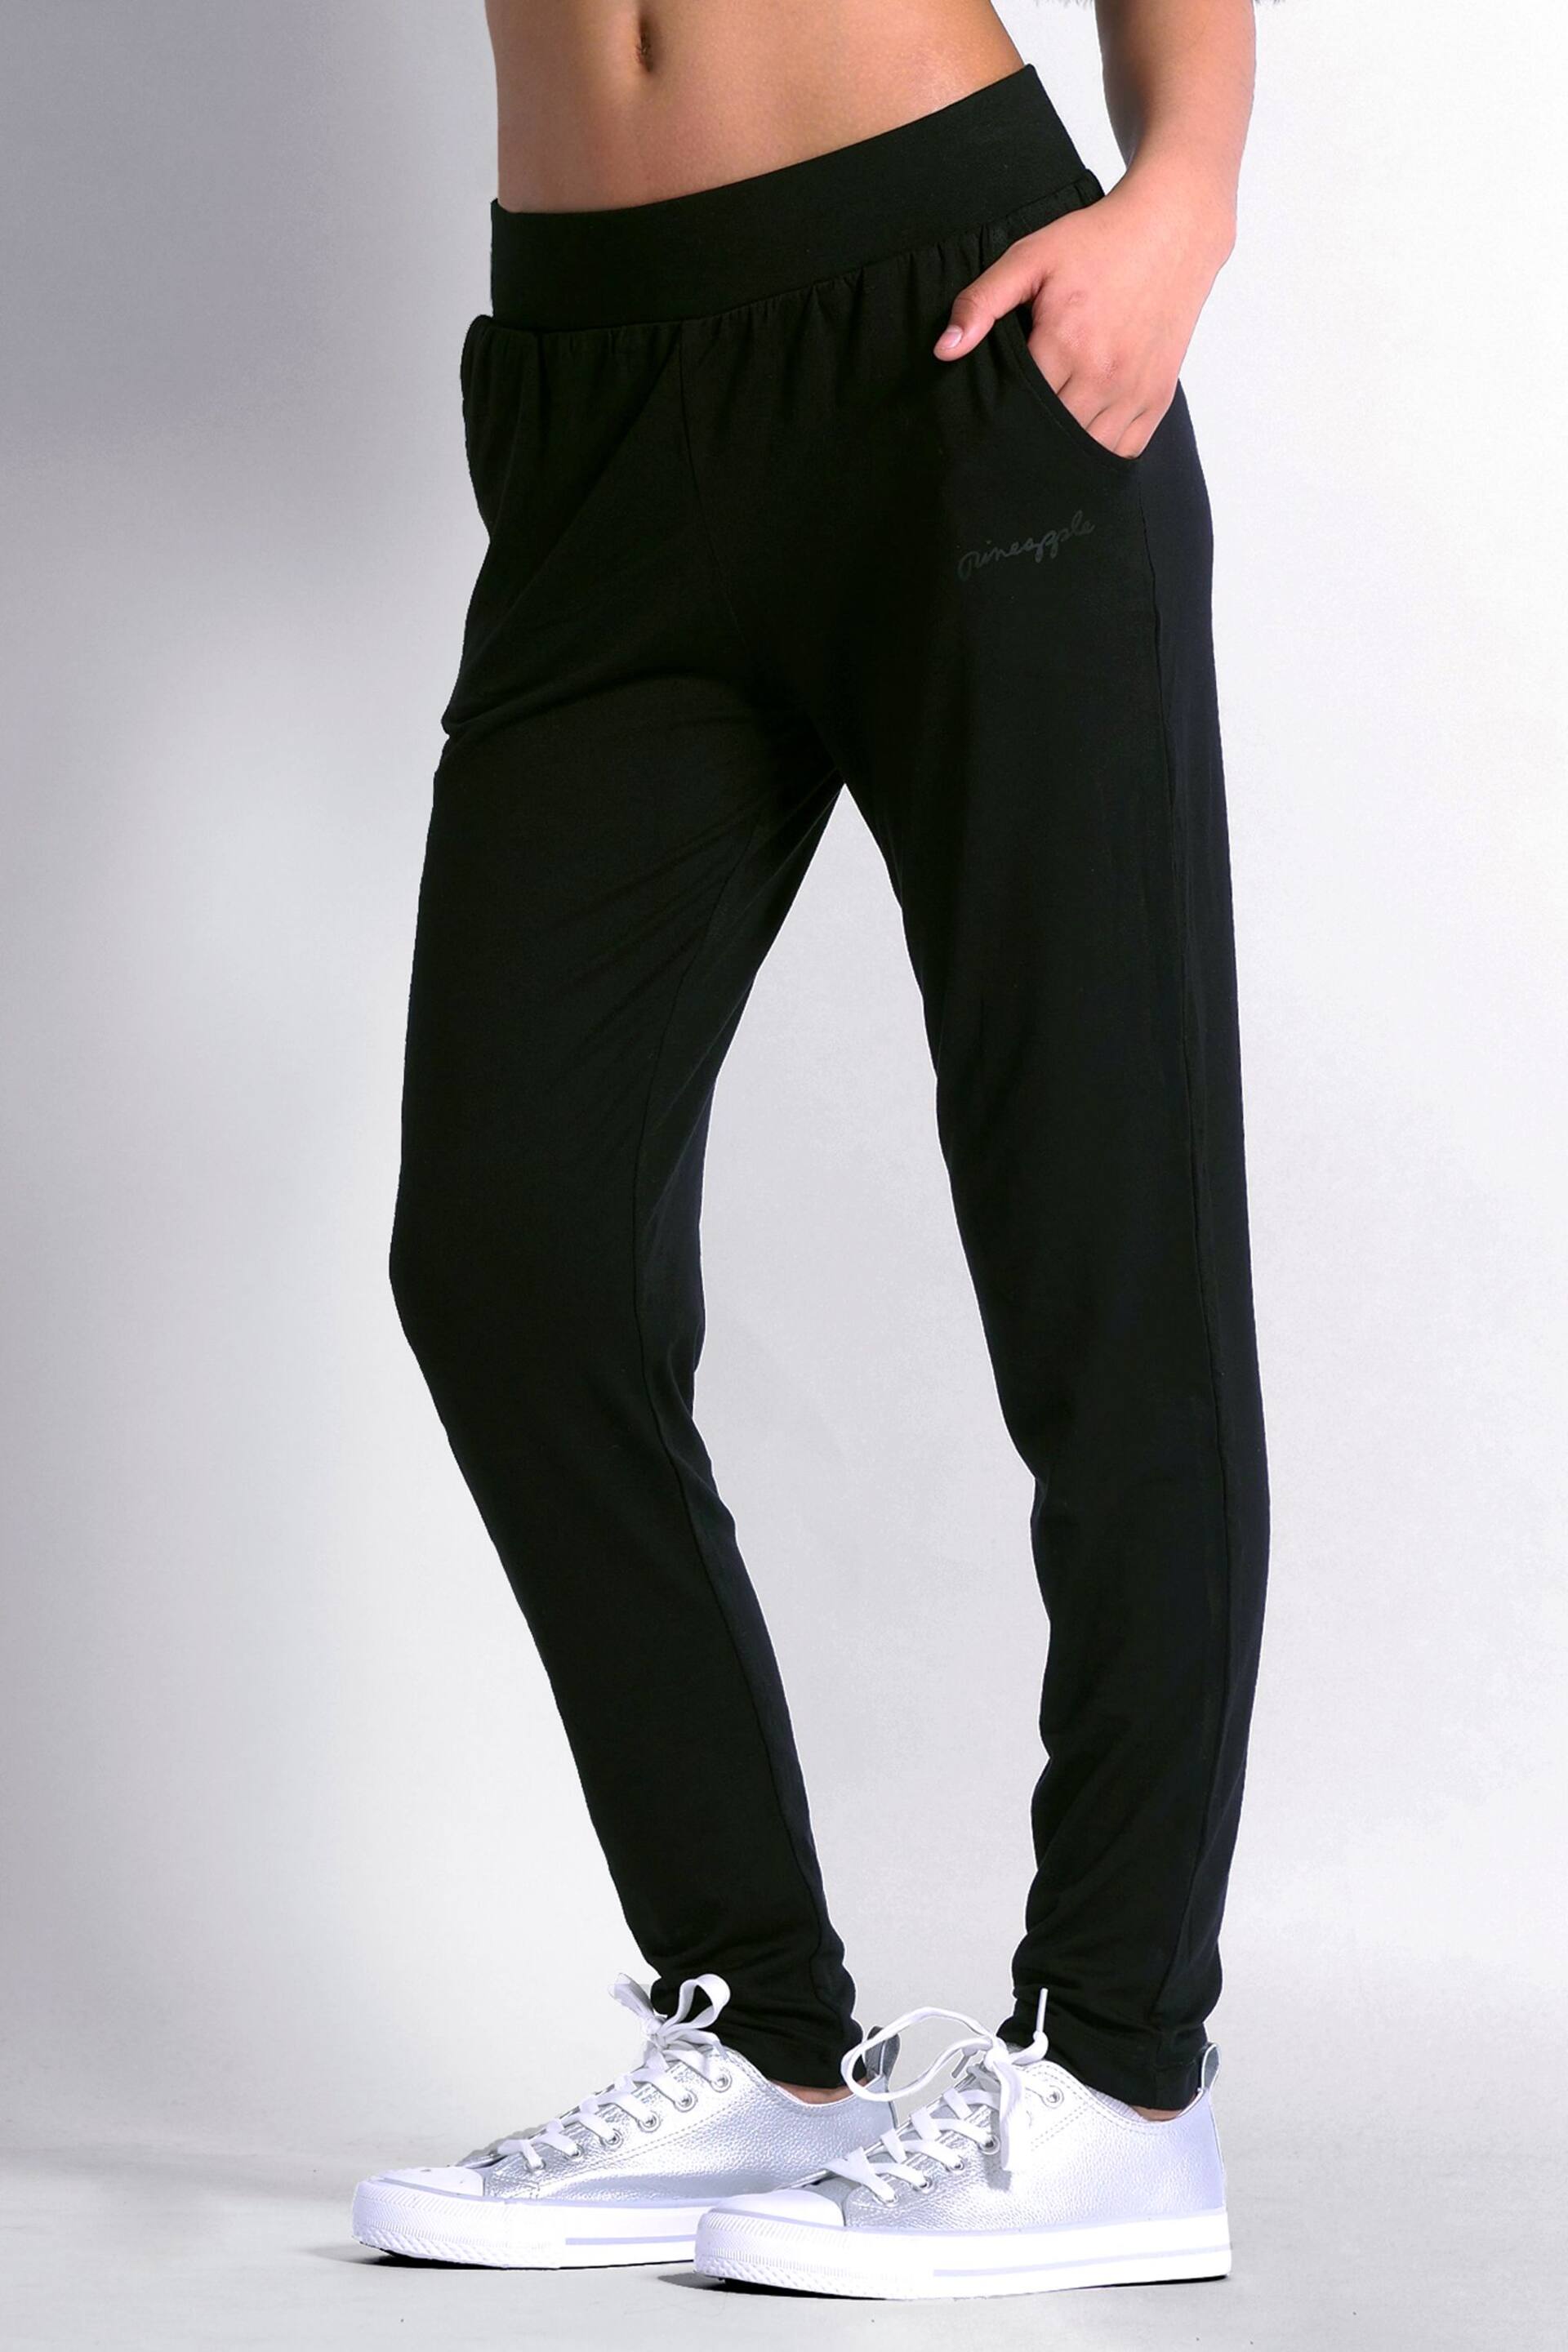 Pineapple Black Viscose Relaxed Fit Jersey Joggers - Image 4 of 5